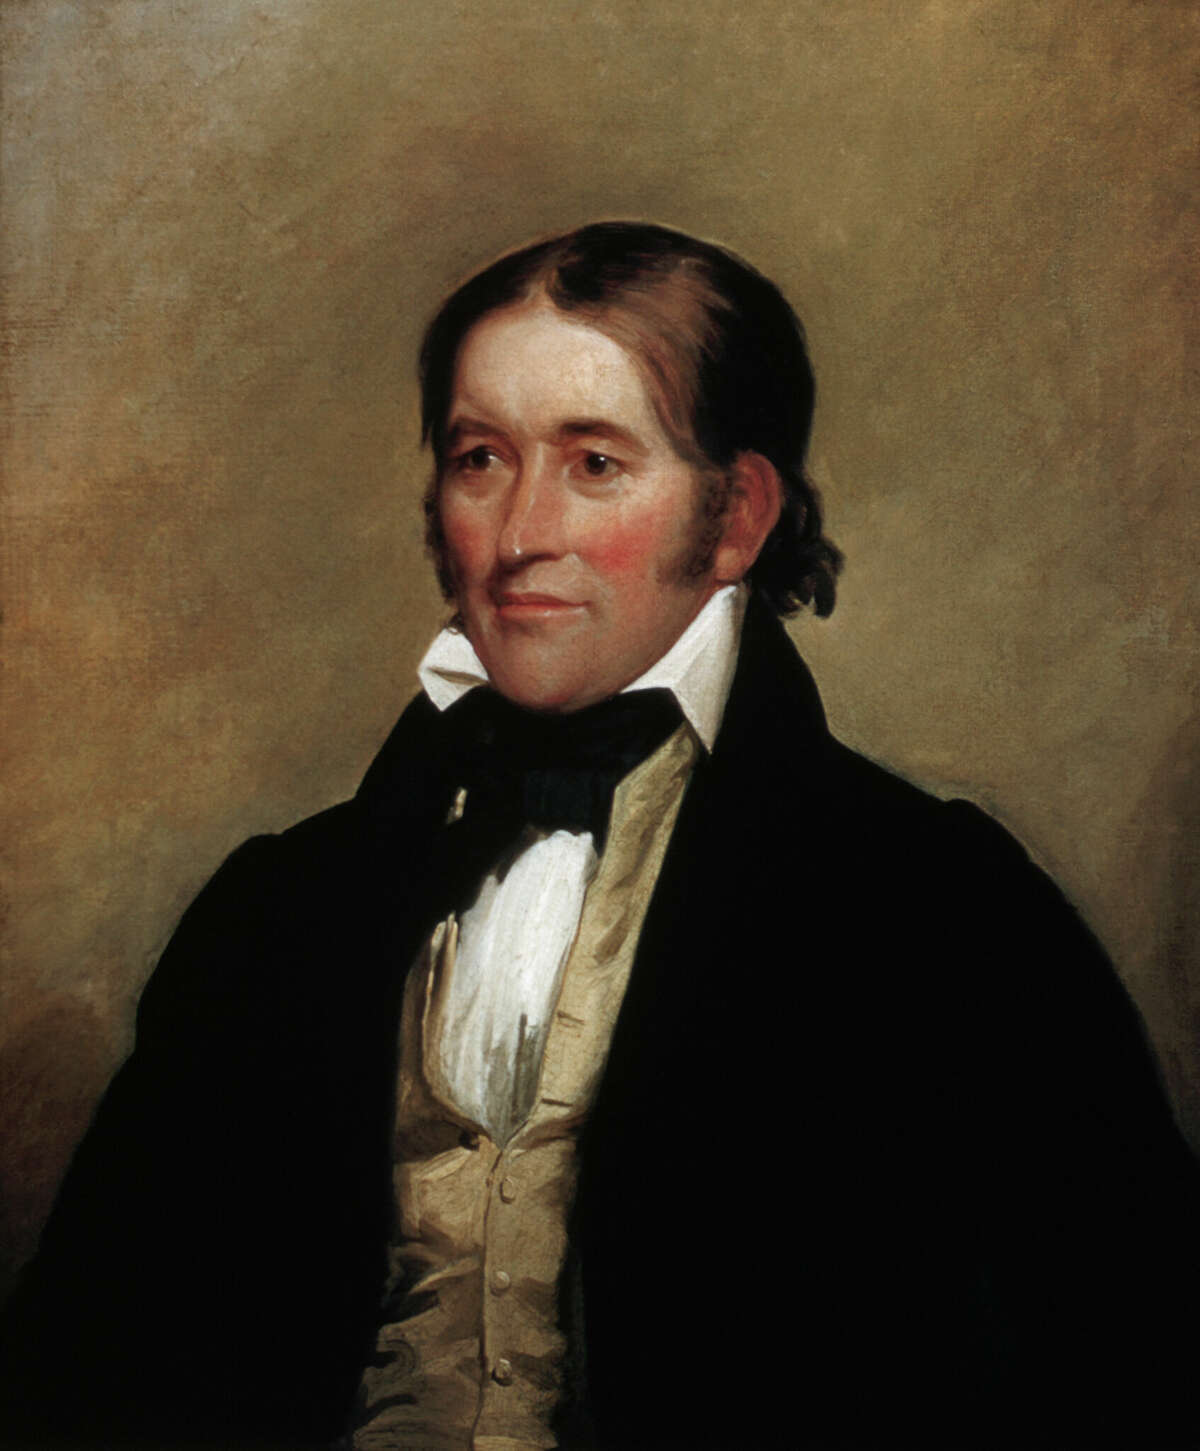 David Crockett's entire life is a 21st century fact-checker’s nightmare. His autobiography is no help. It is titled “A Narrative of the Life of David Crockett of Tennessee: His Own Story.” Except it was ghostwritten by a congressman for political purposes. 